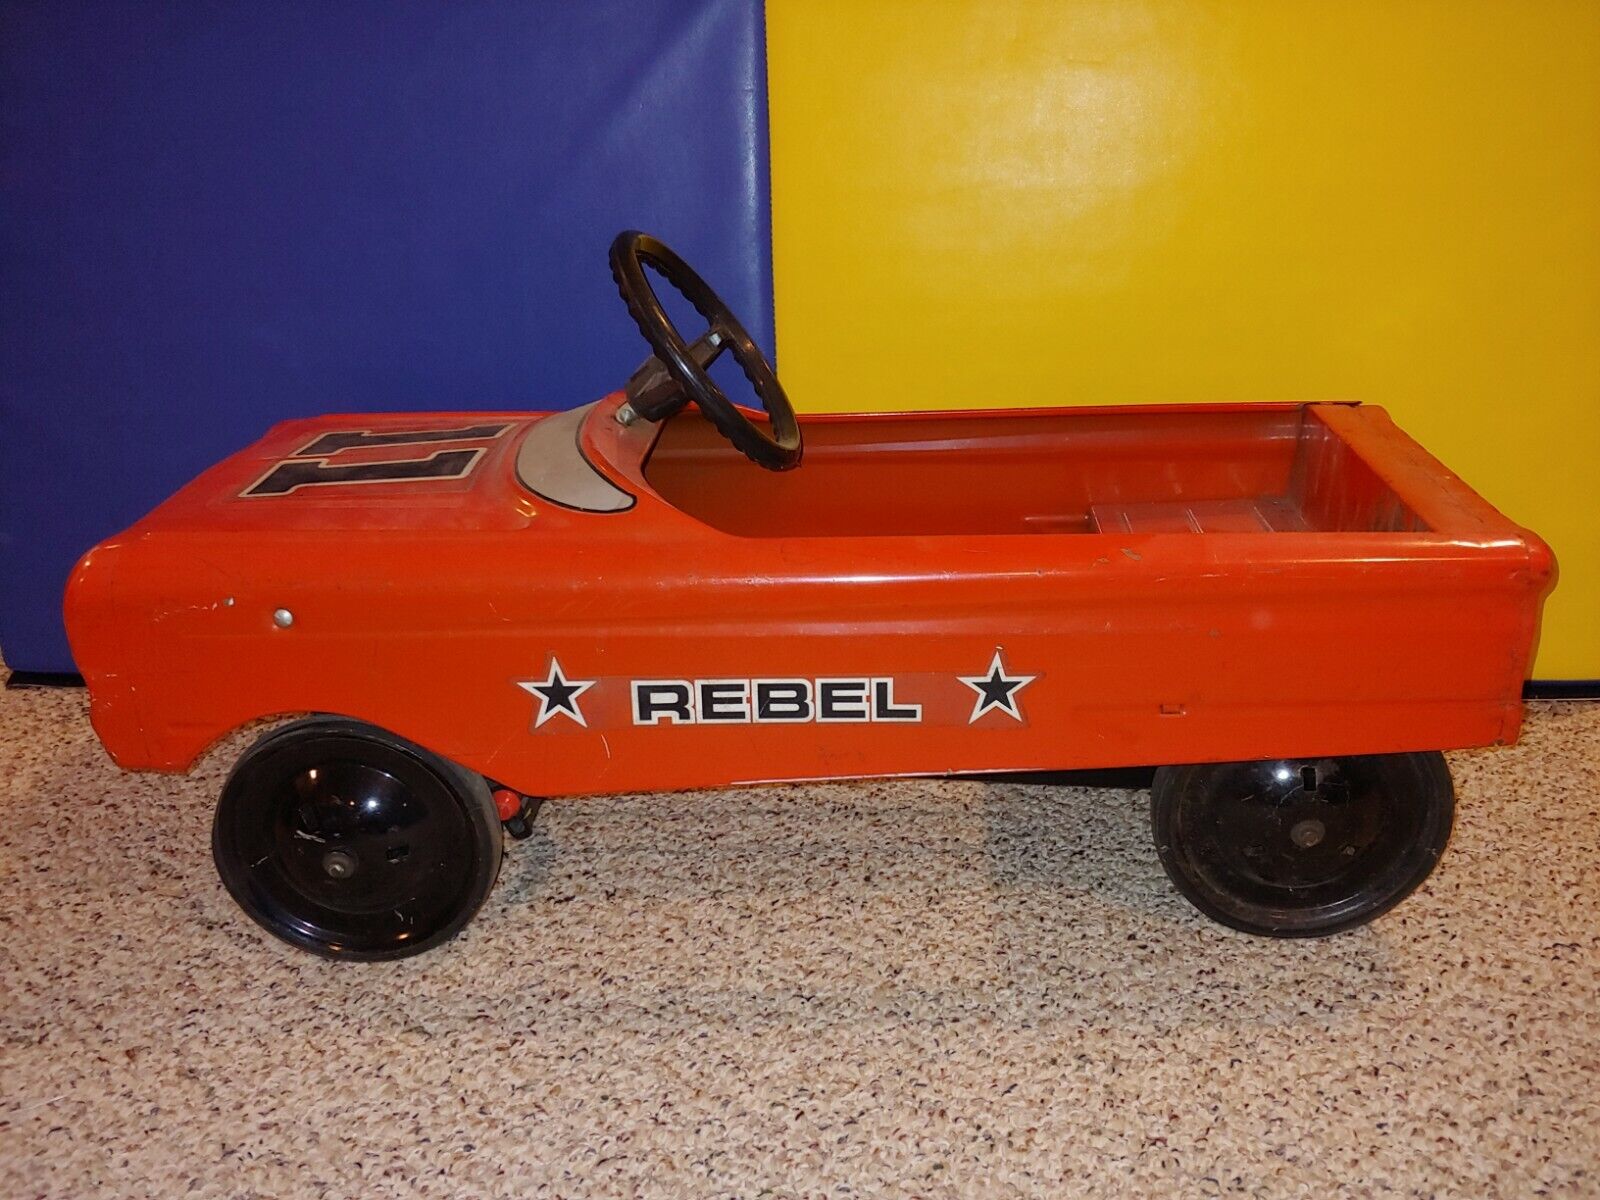 Vintage 70s/80s Rare Hard To Find Amf "rebel, 11" Dukes Of Hazzard Pedal Car Toy